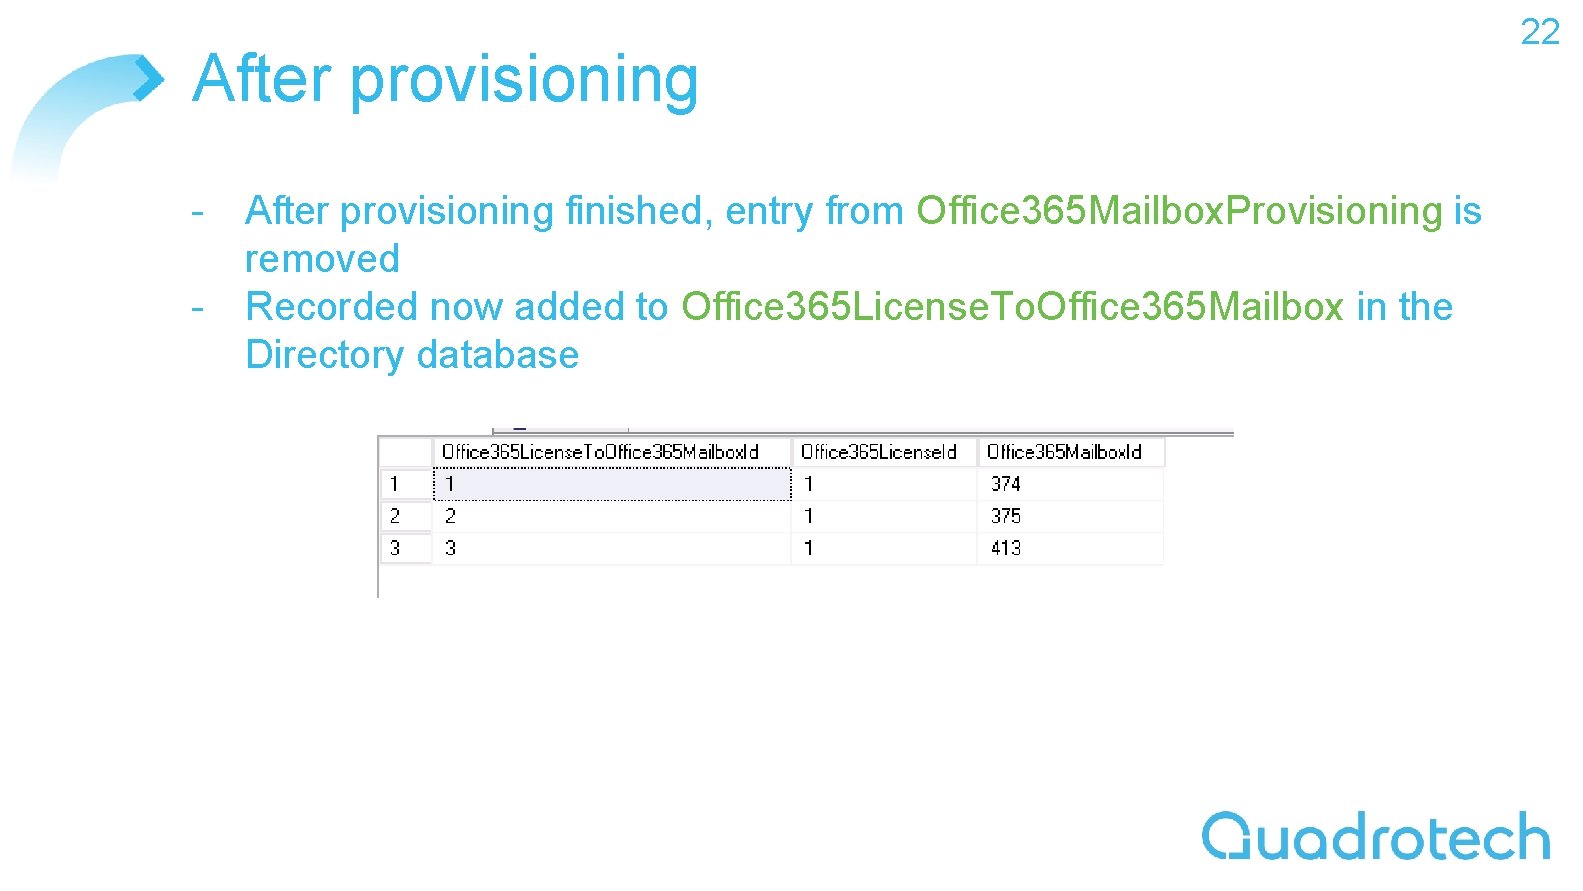 After provisioning - After provisioning finished, entry from Office 365 Mailbox. Provisioning is removed